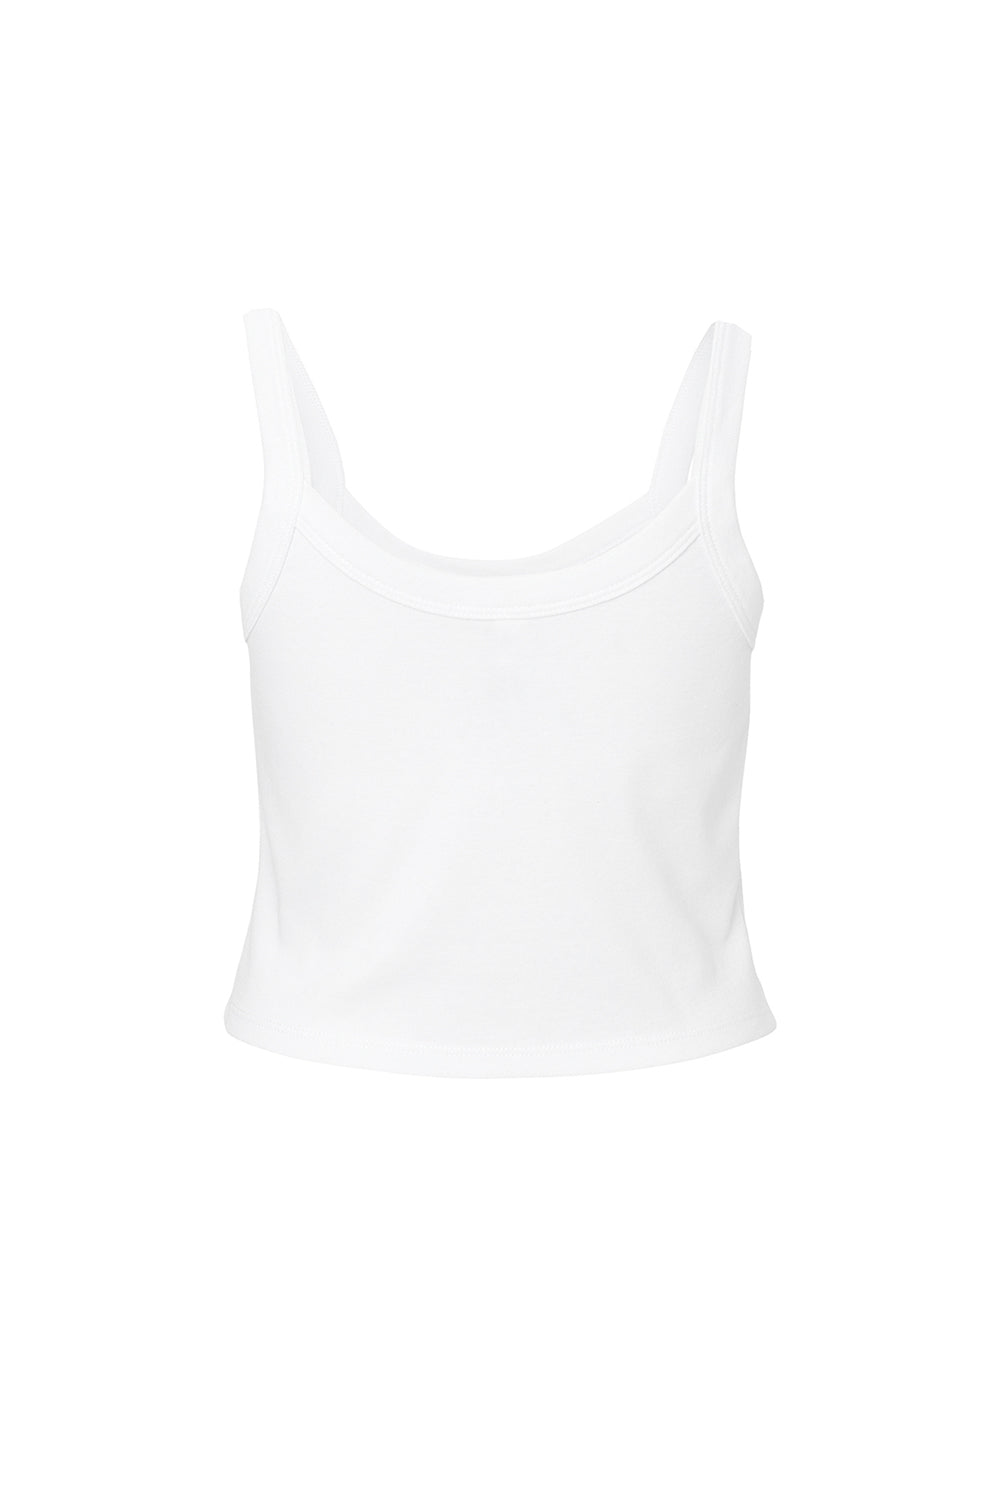 Bella + Canvas 1012BE Womens Micro Ribbed Scoop Tank Top White Flat Back